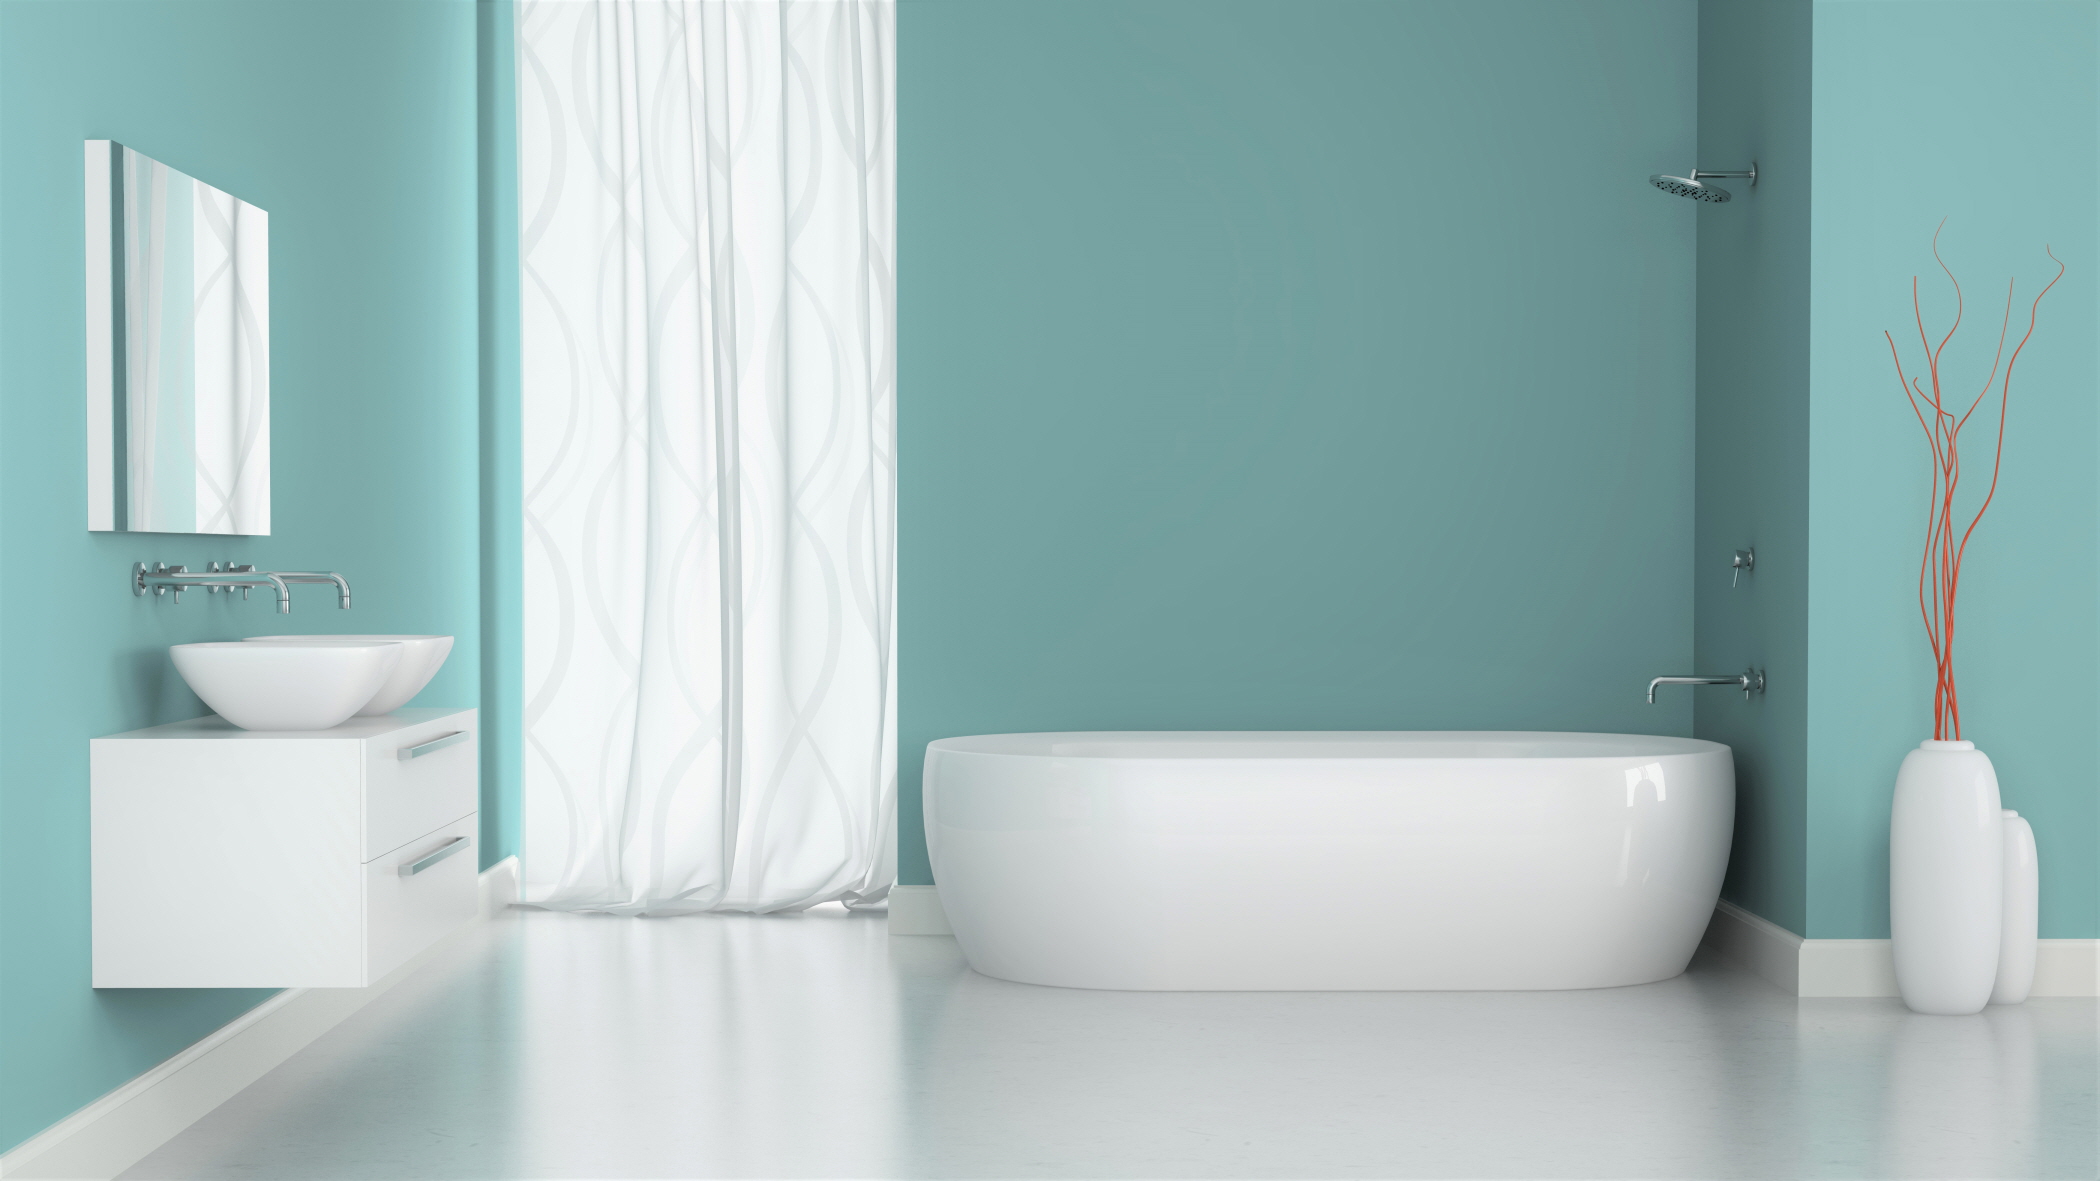 Powder Blue offers a tranquil and spacious bathroom ambiance.